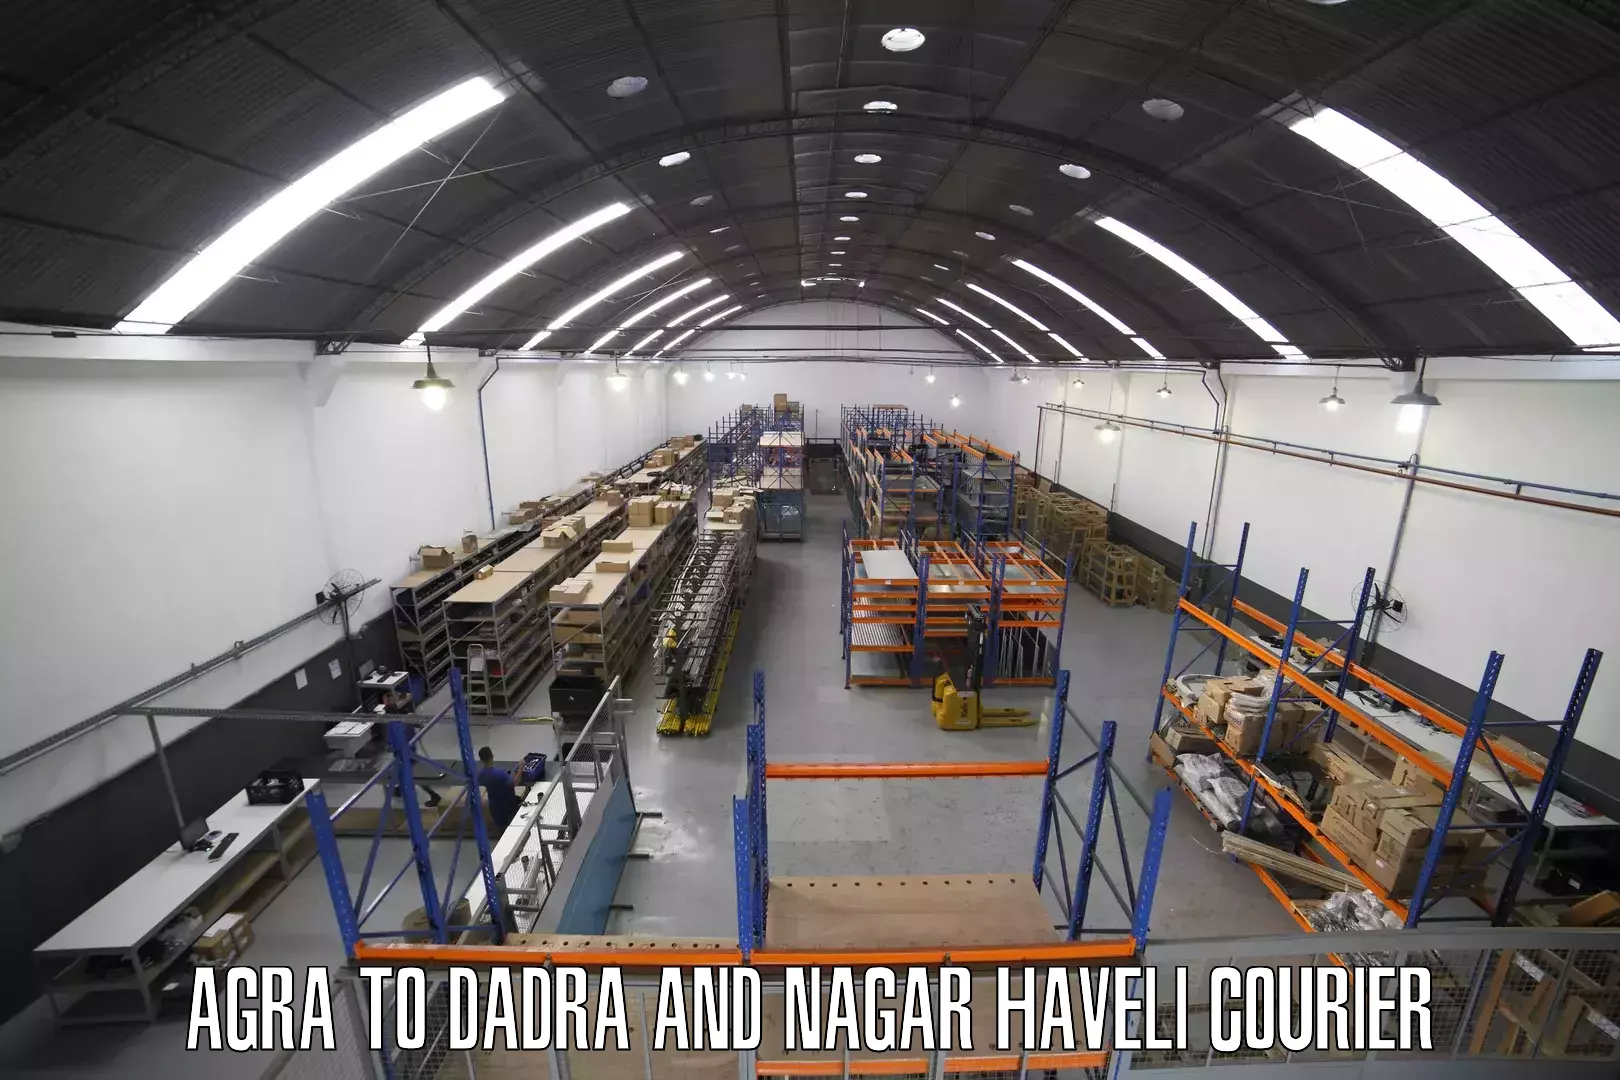 Nationwide courier service Agra to Dadra and Nagar Haveli